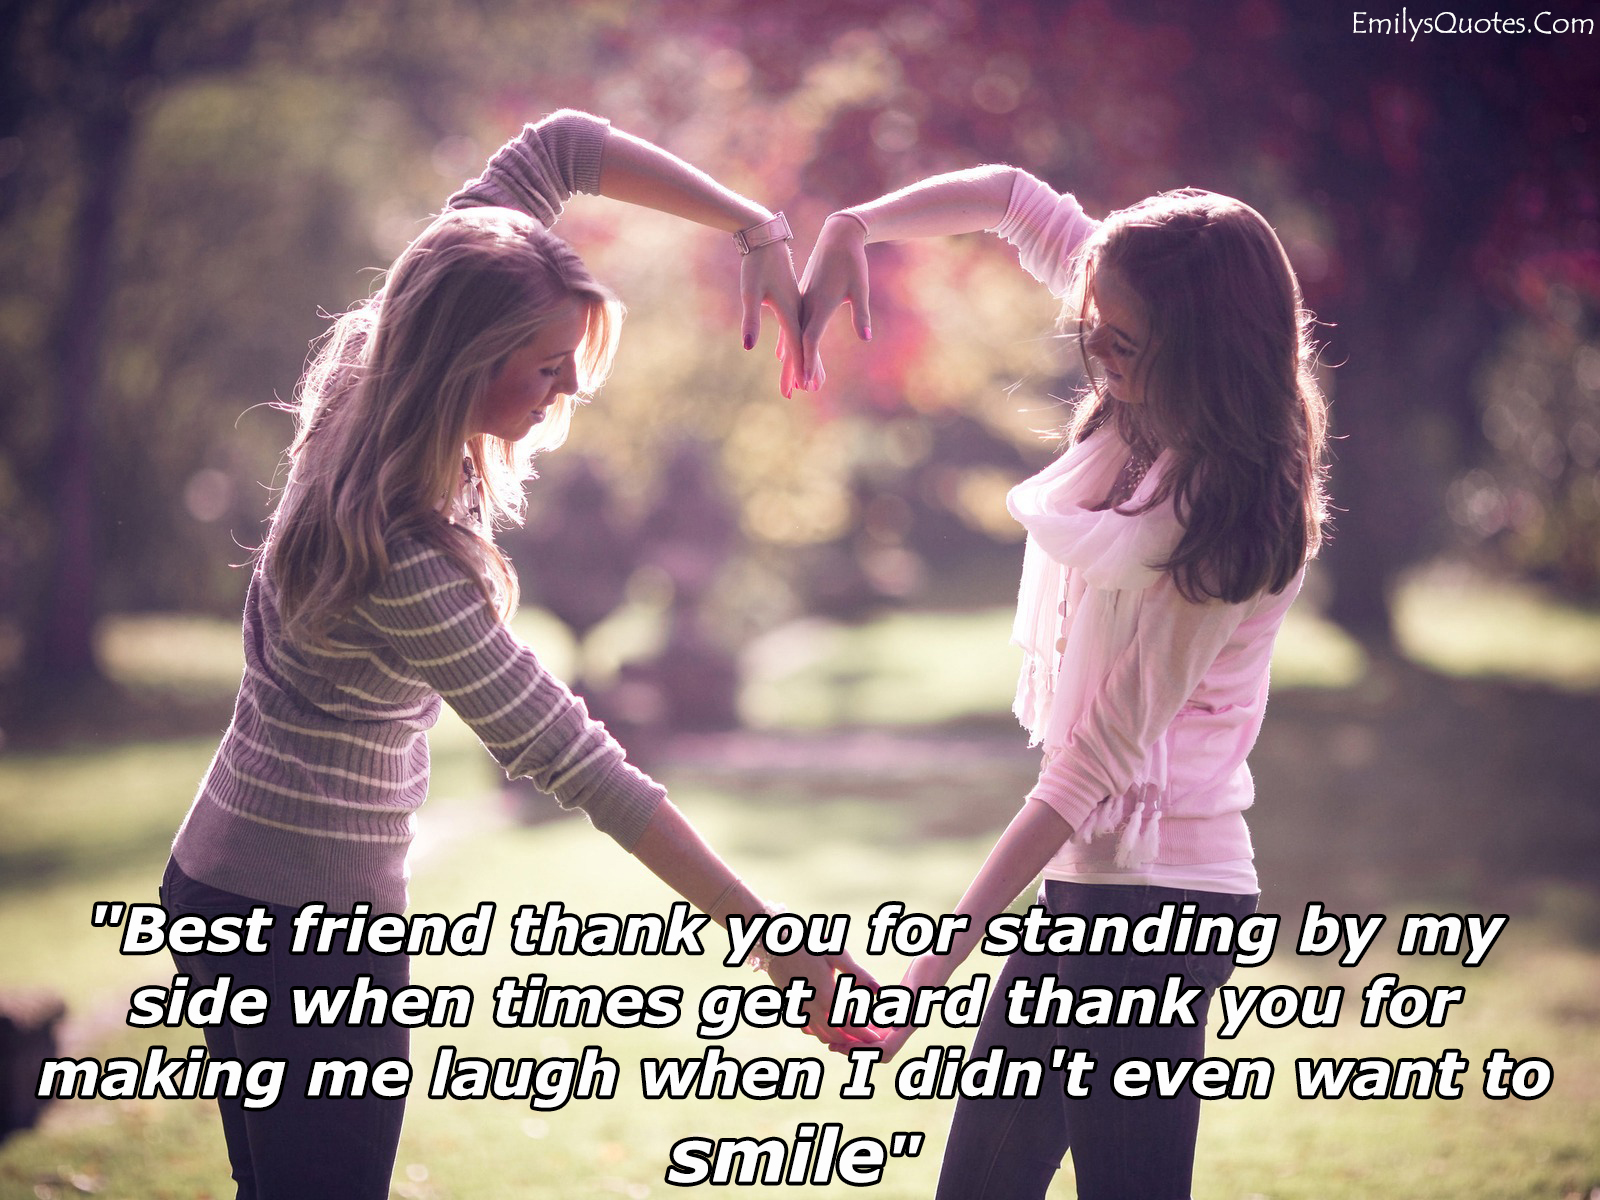  Best  friend  thank you for standing by my  side when times 